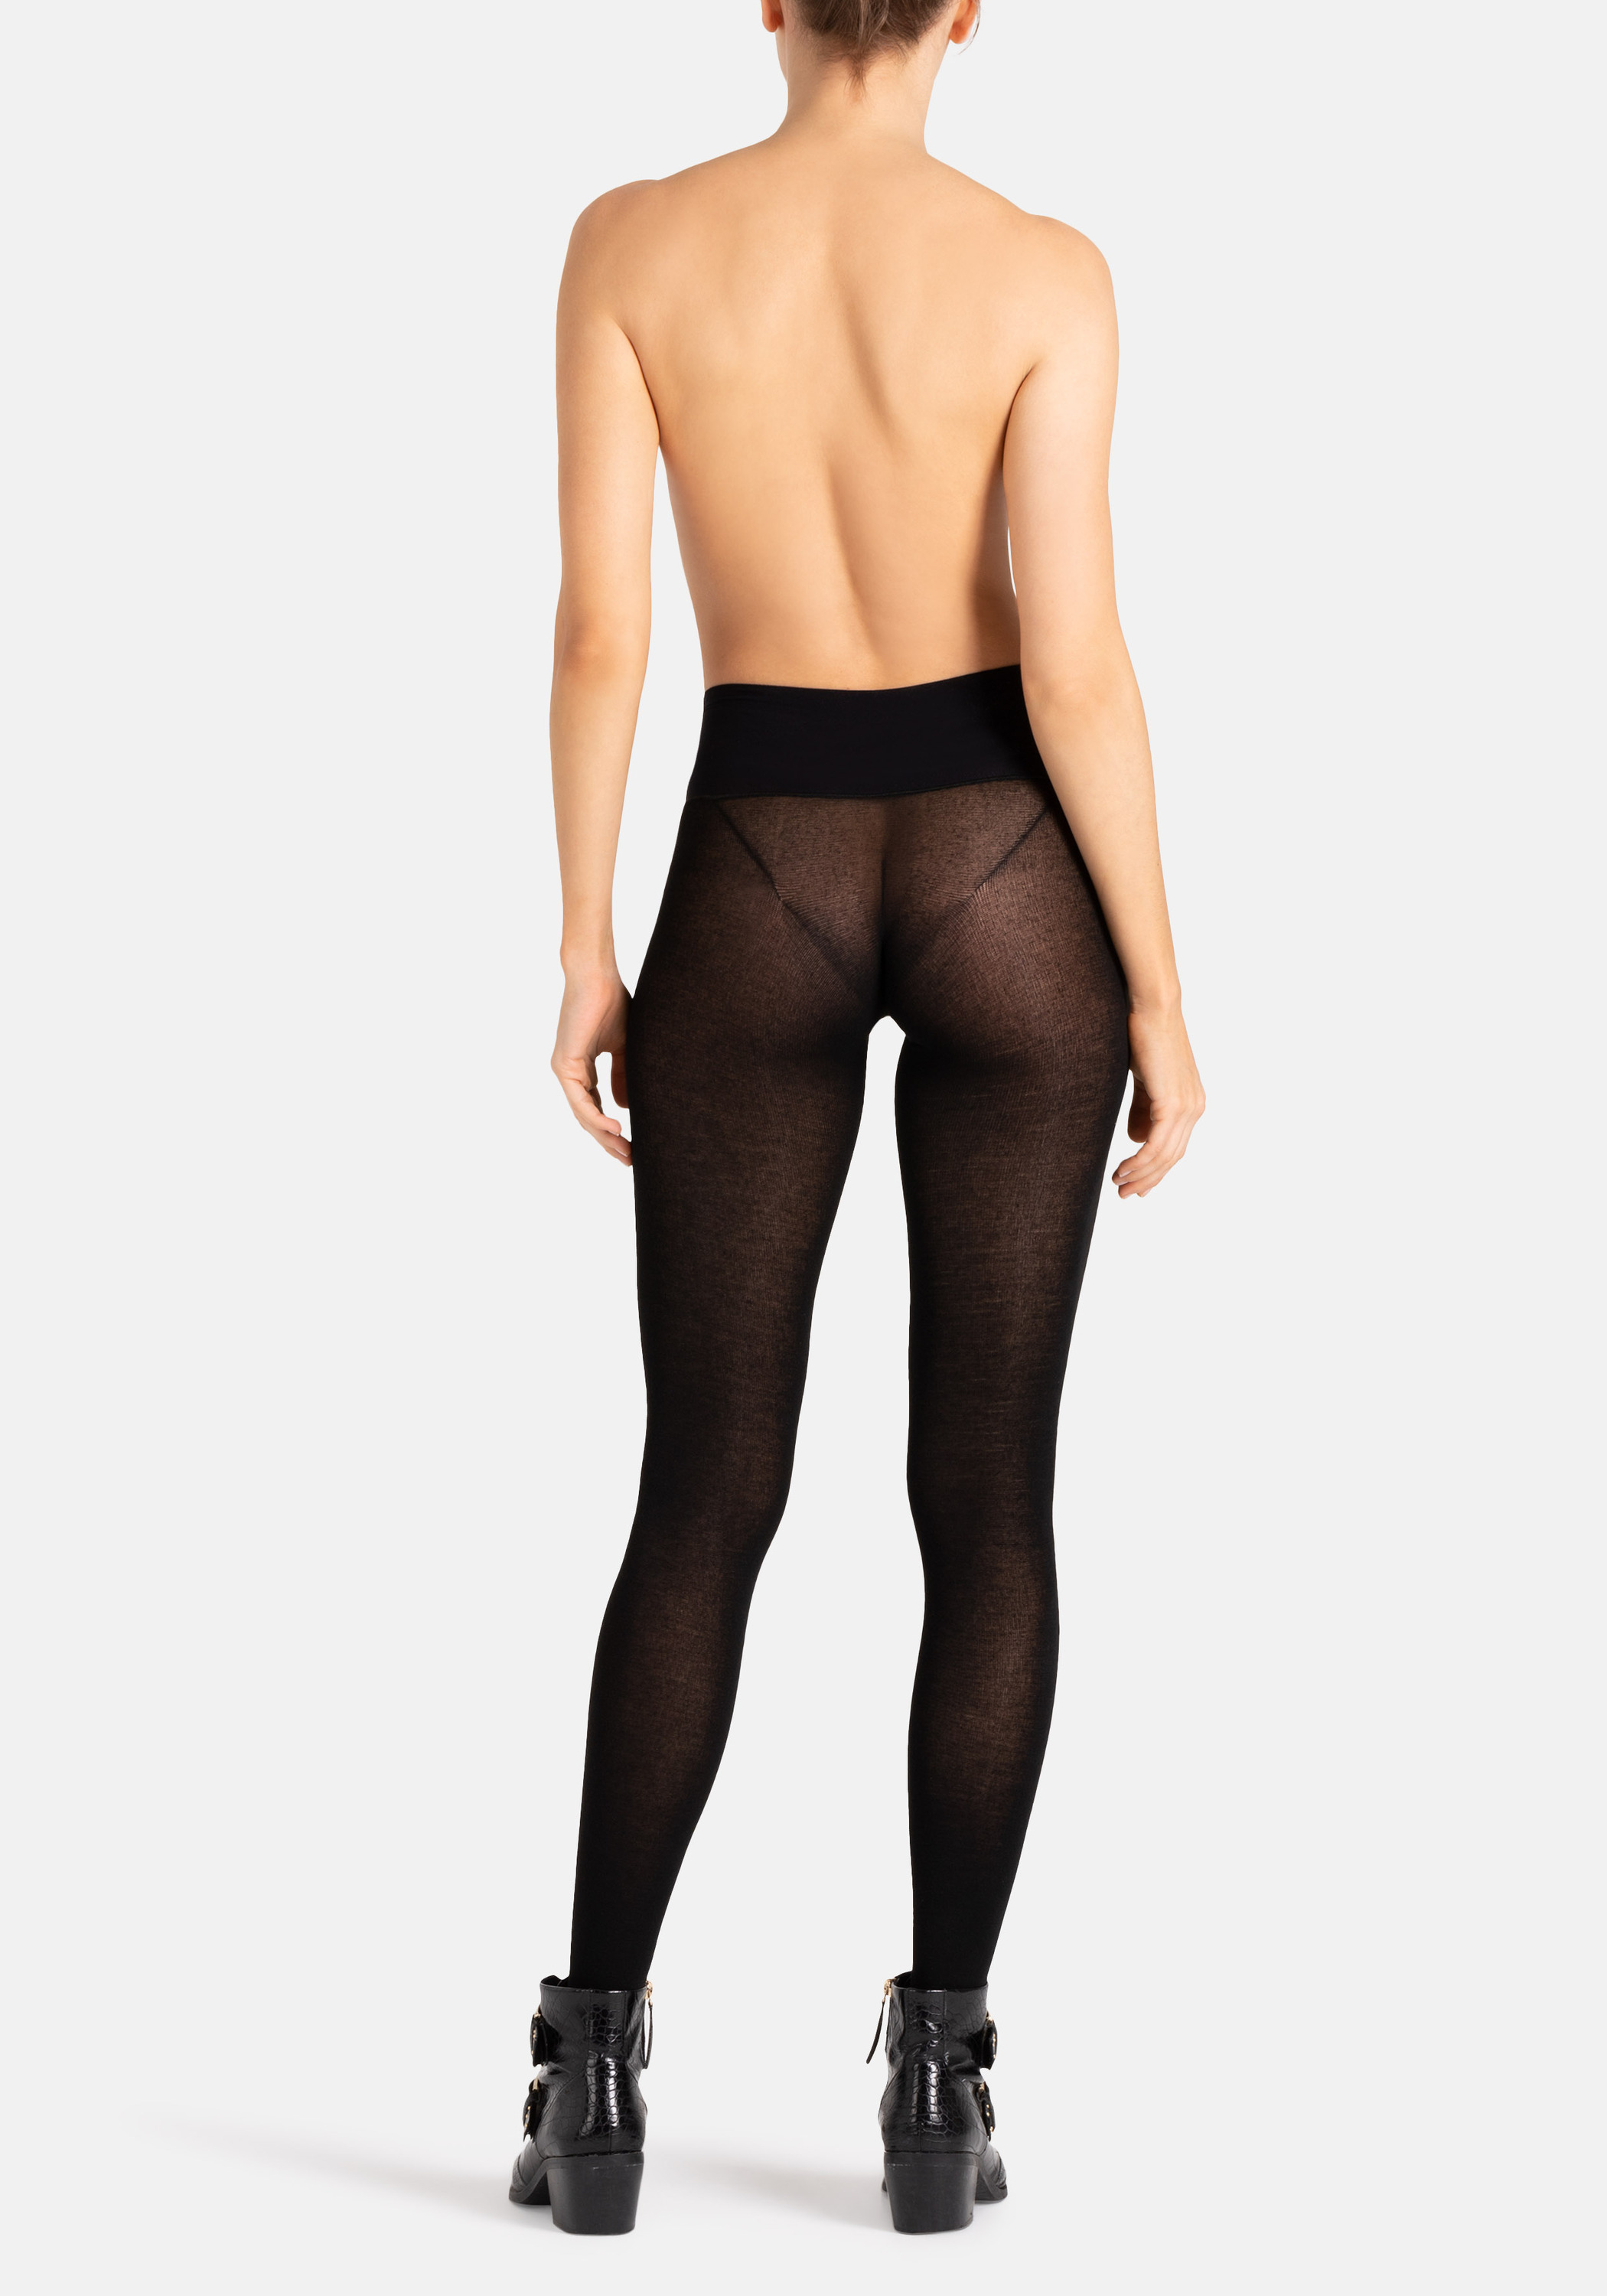 TOO HOT TO HIDE Strumpfhose Supersoft Paola in Schwarz 